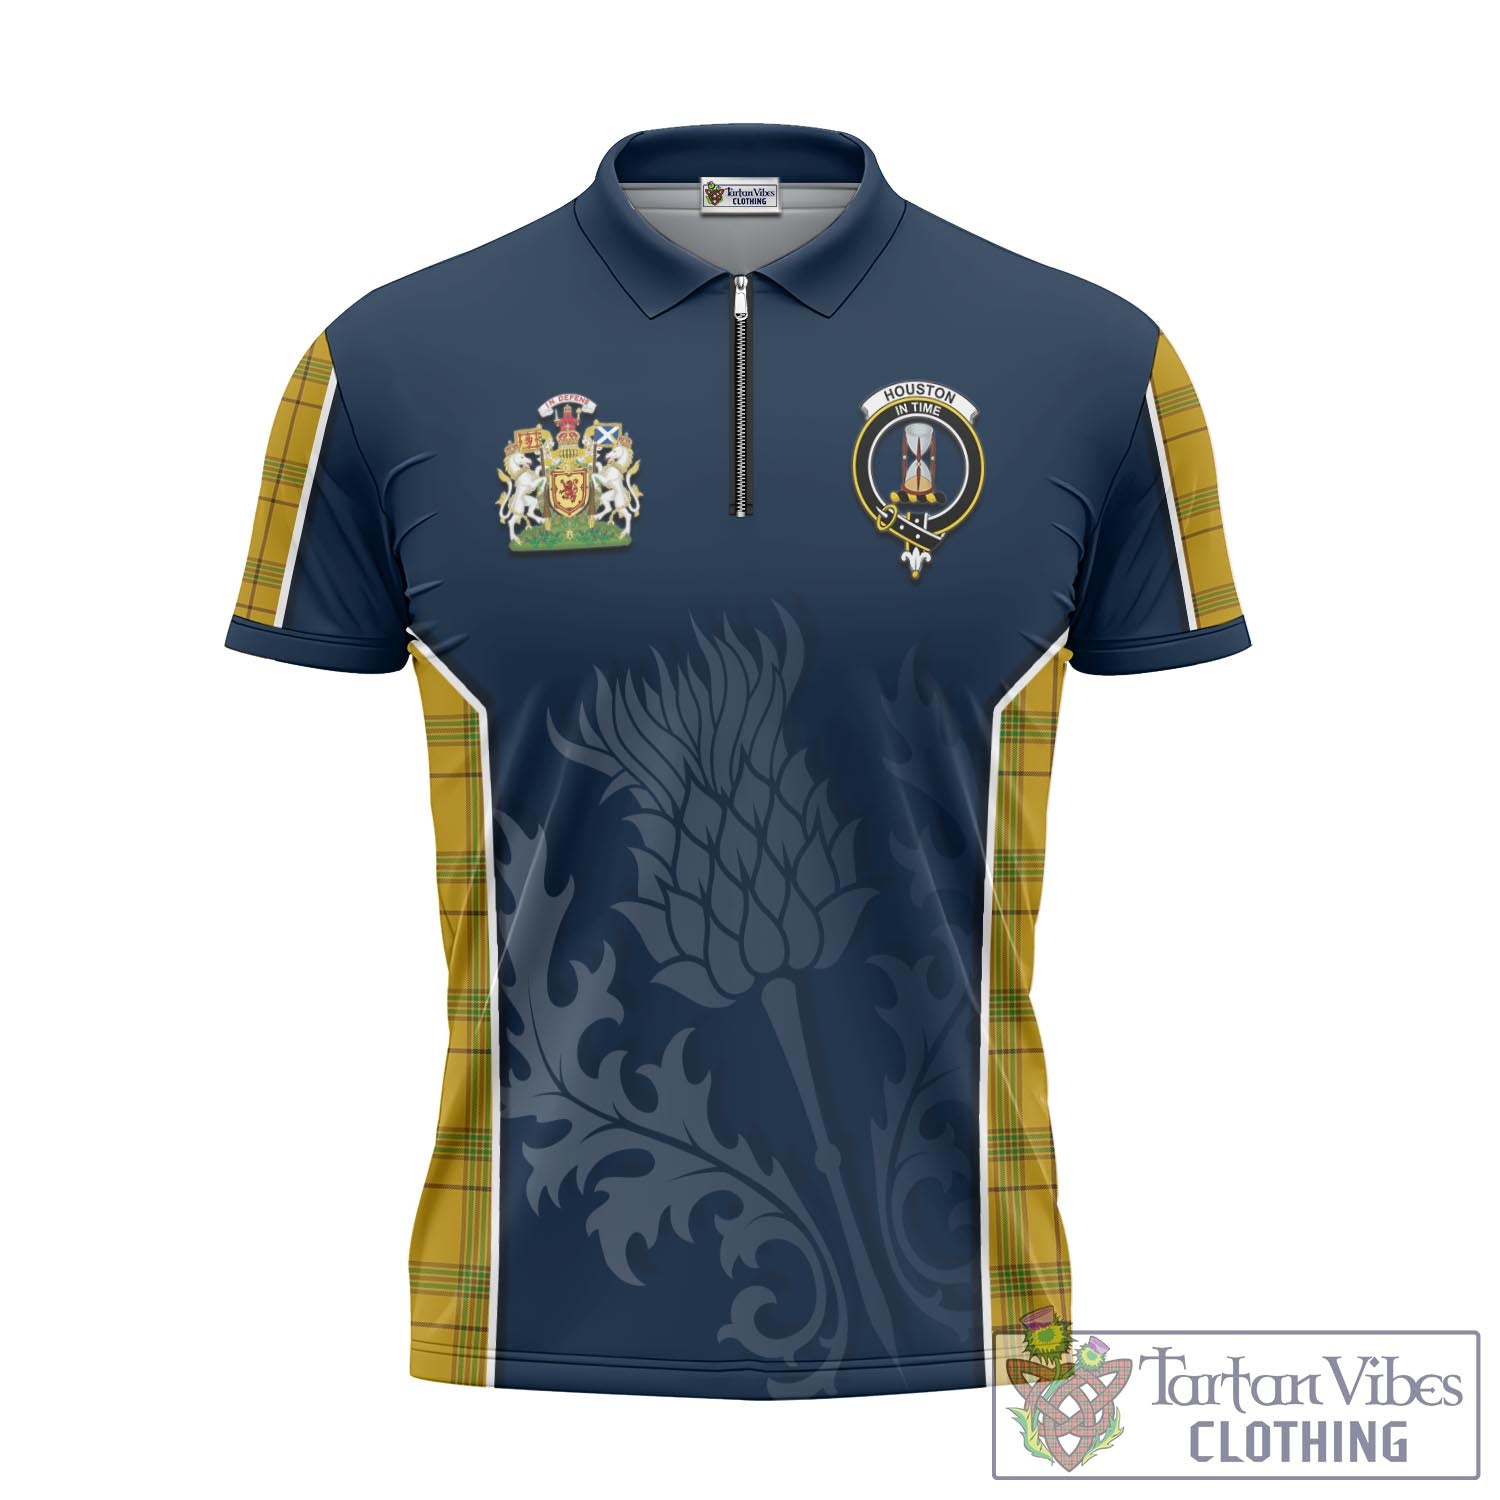 Tartan Vibes Clothing Houston Tartan Zipper Polo Shirt with Family Crest and Scottish Thistle Vibes Sport Style